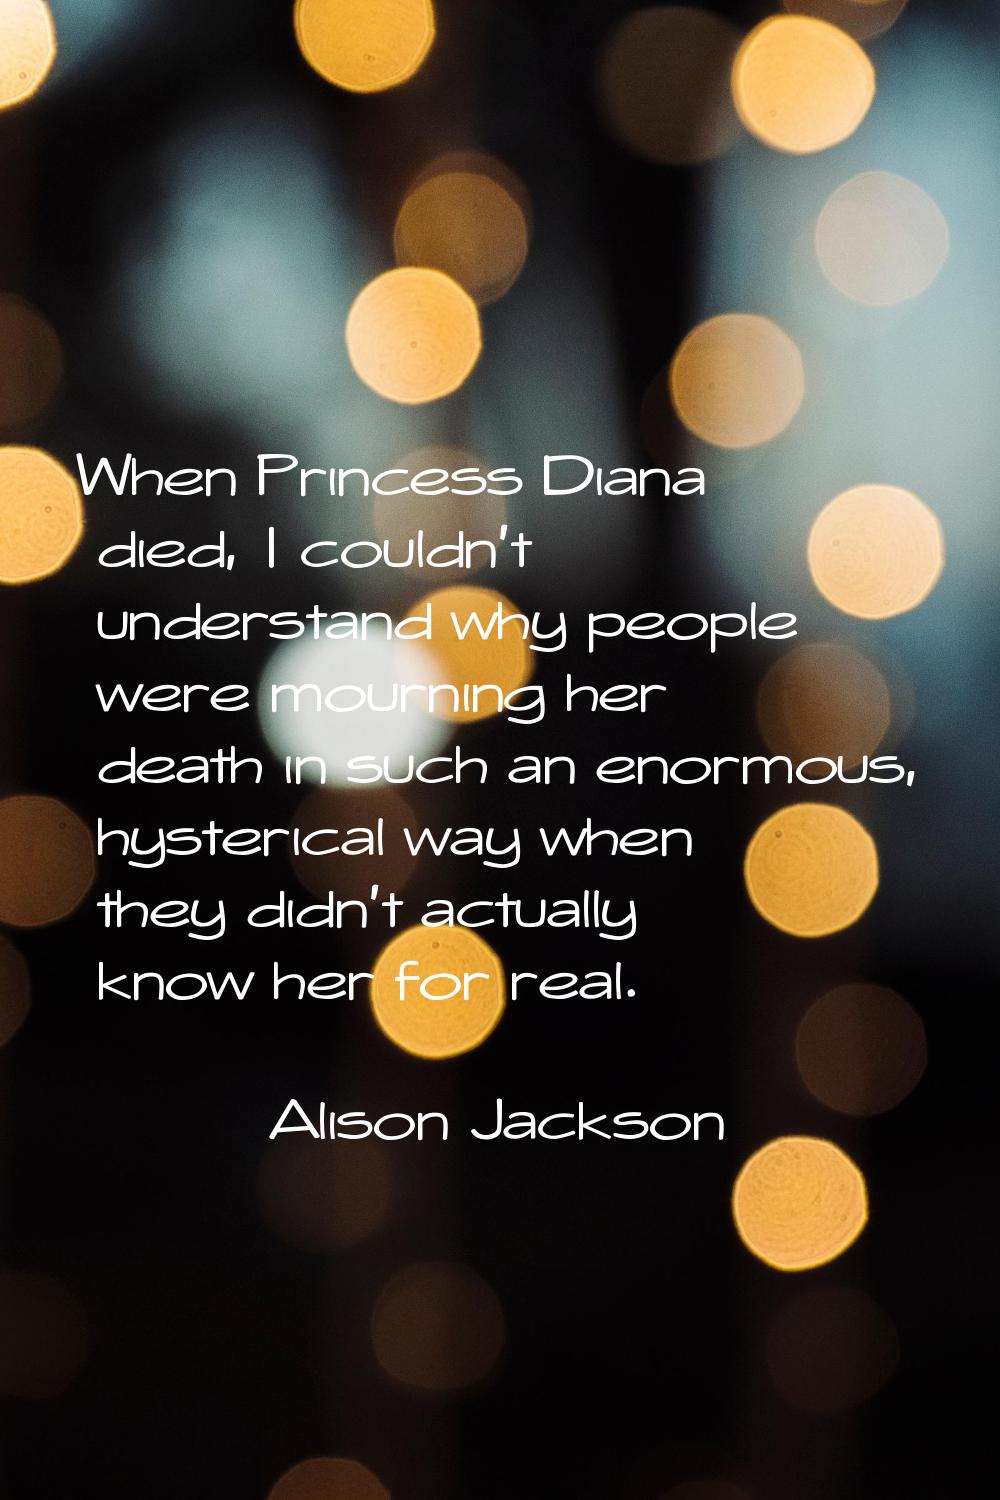 When Princess Diana died, I couldn't understand why people were mourning her death in such an enorm